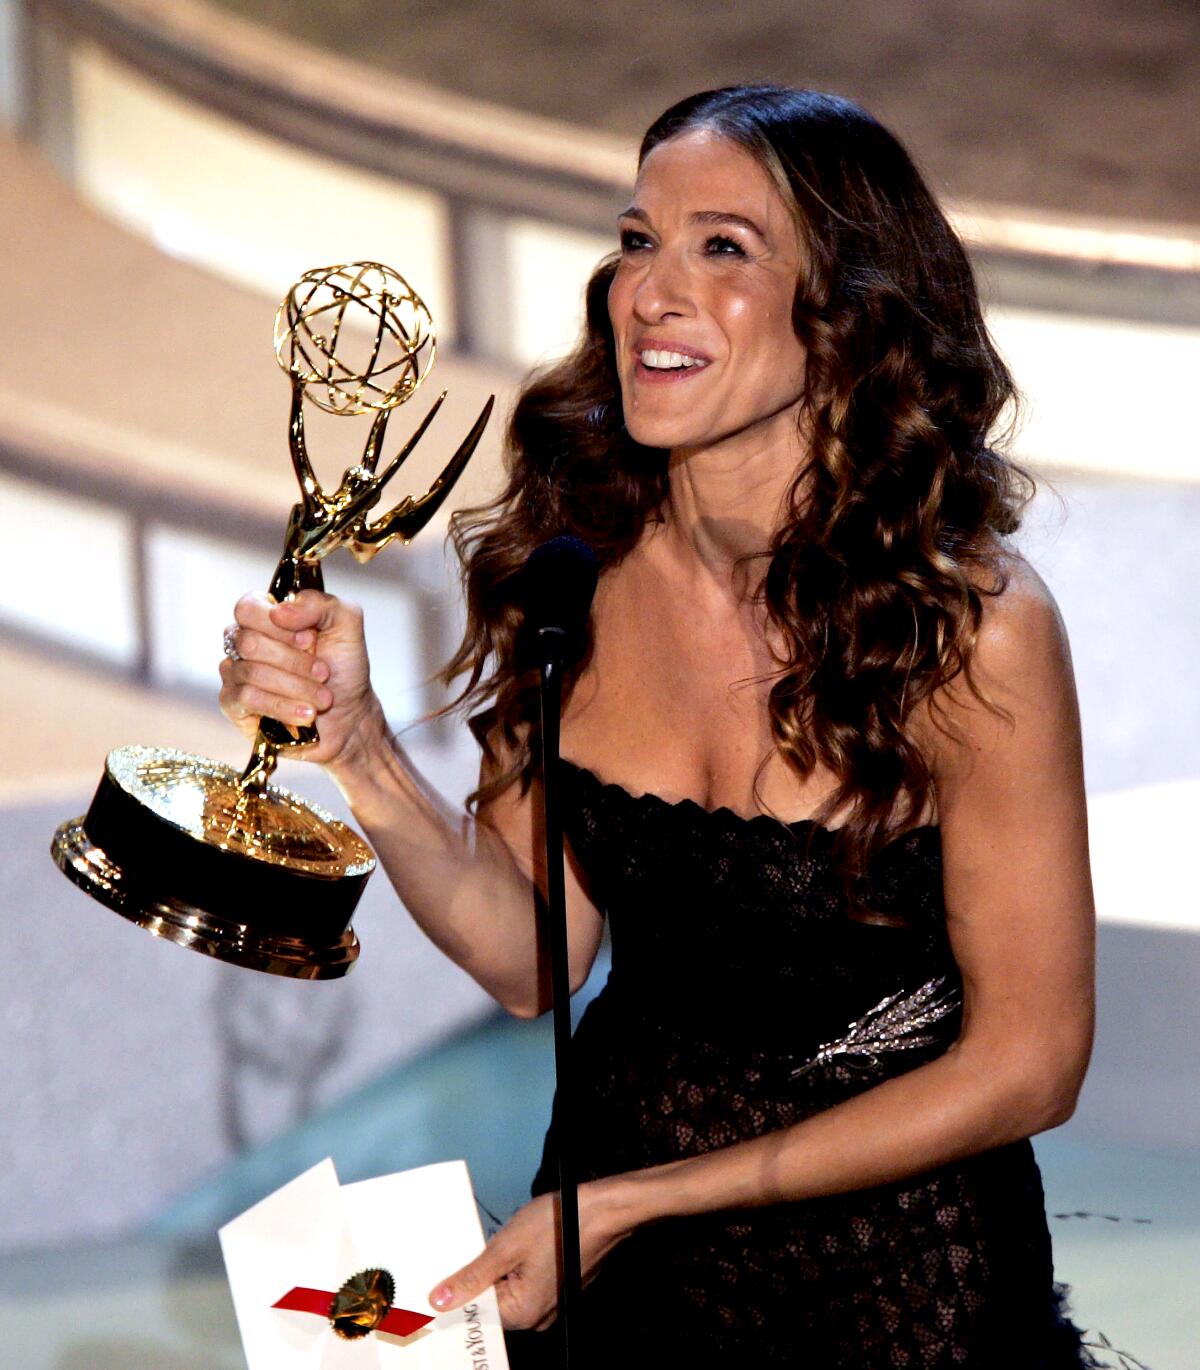 Sarah Jessica Parker holds her Emmy Award onstage in 2004.